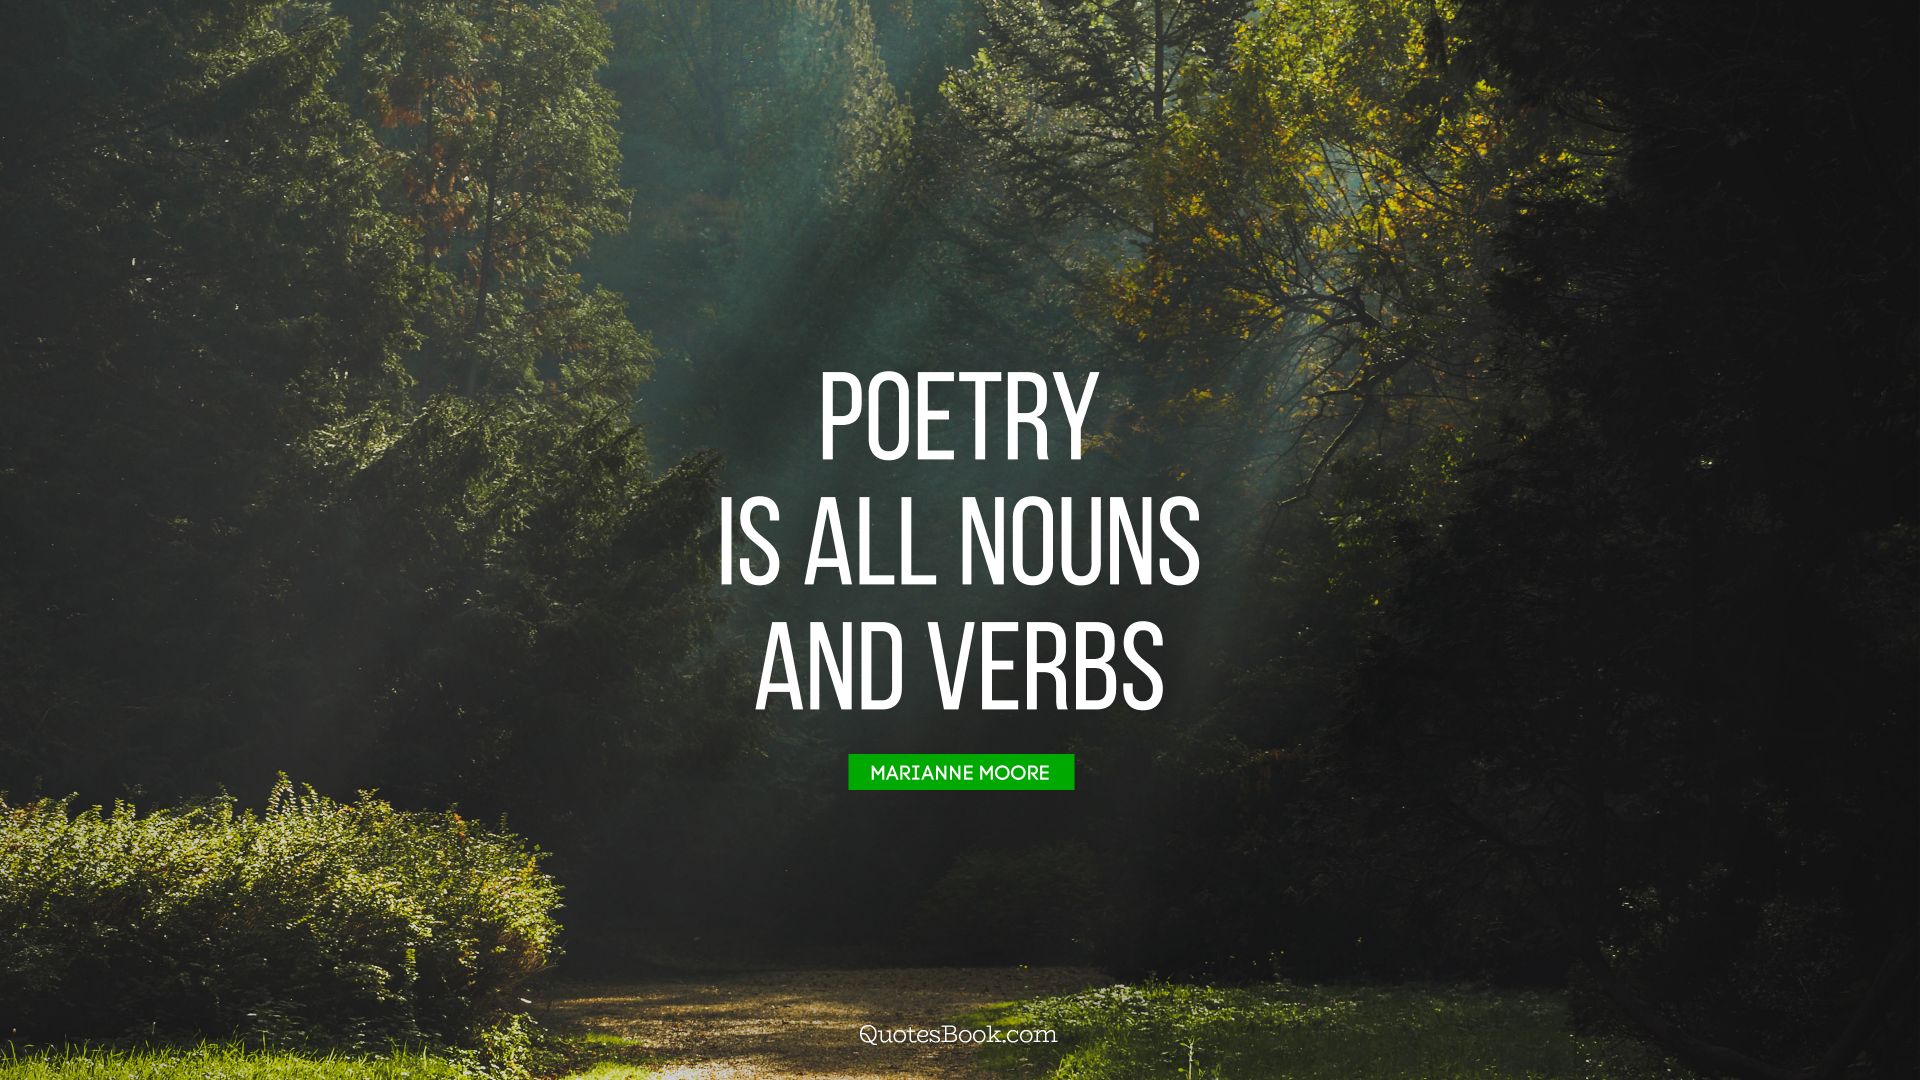 Poetry is all nouns and verbs. - Quote by Marianne Moore